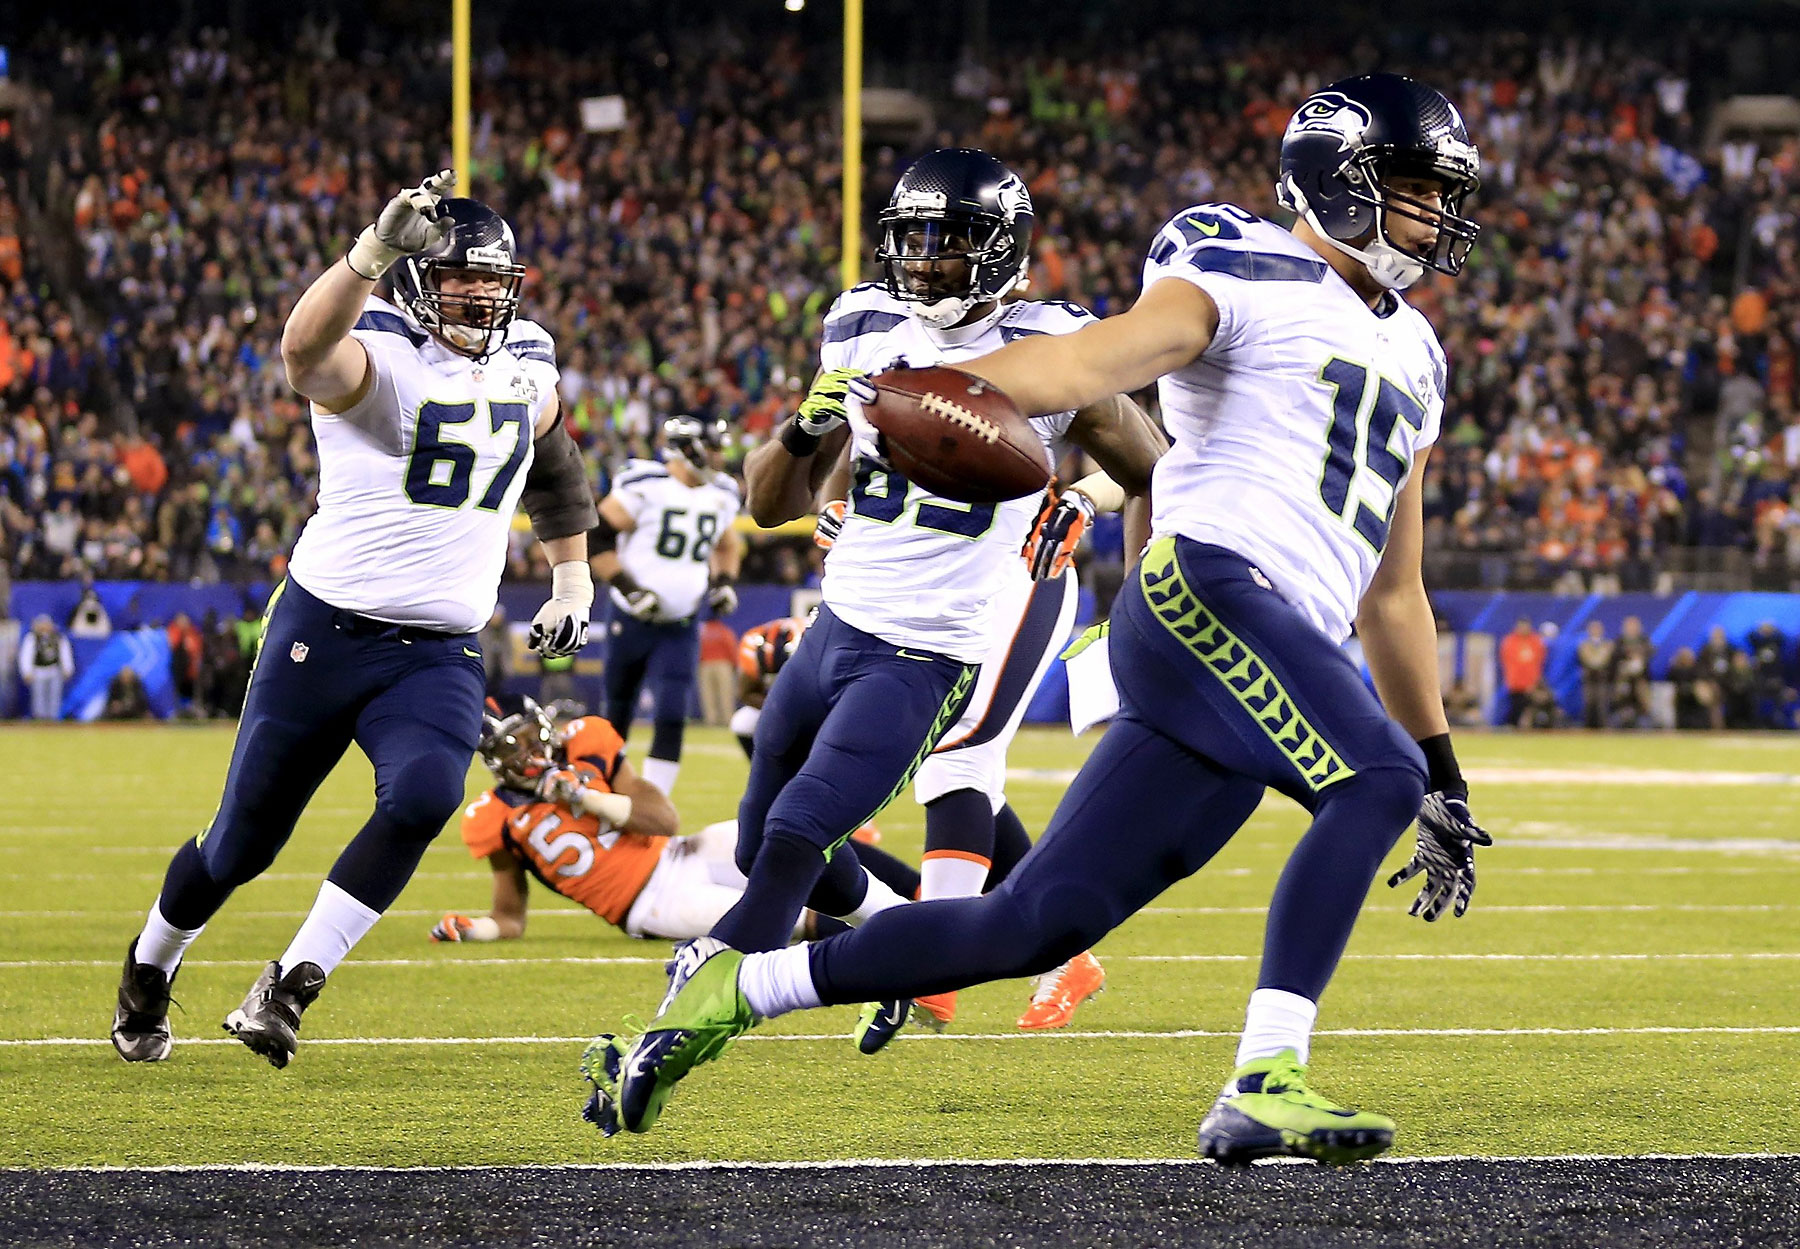 Wide receiver Jermaine Kearse of the Seattle Seahawks runs 23 yards to score a third quarter touchdown.